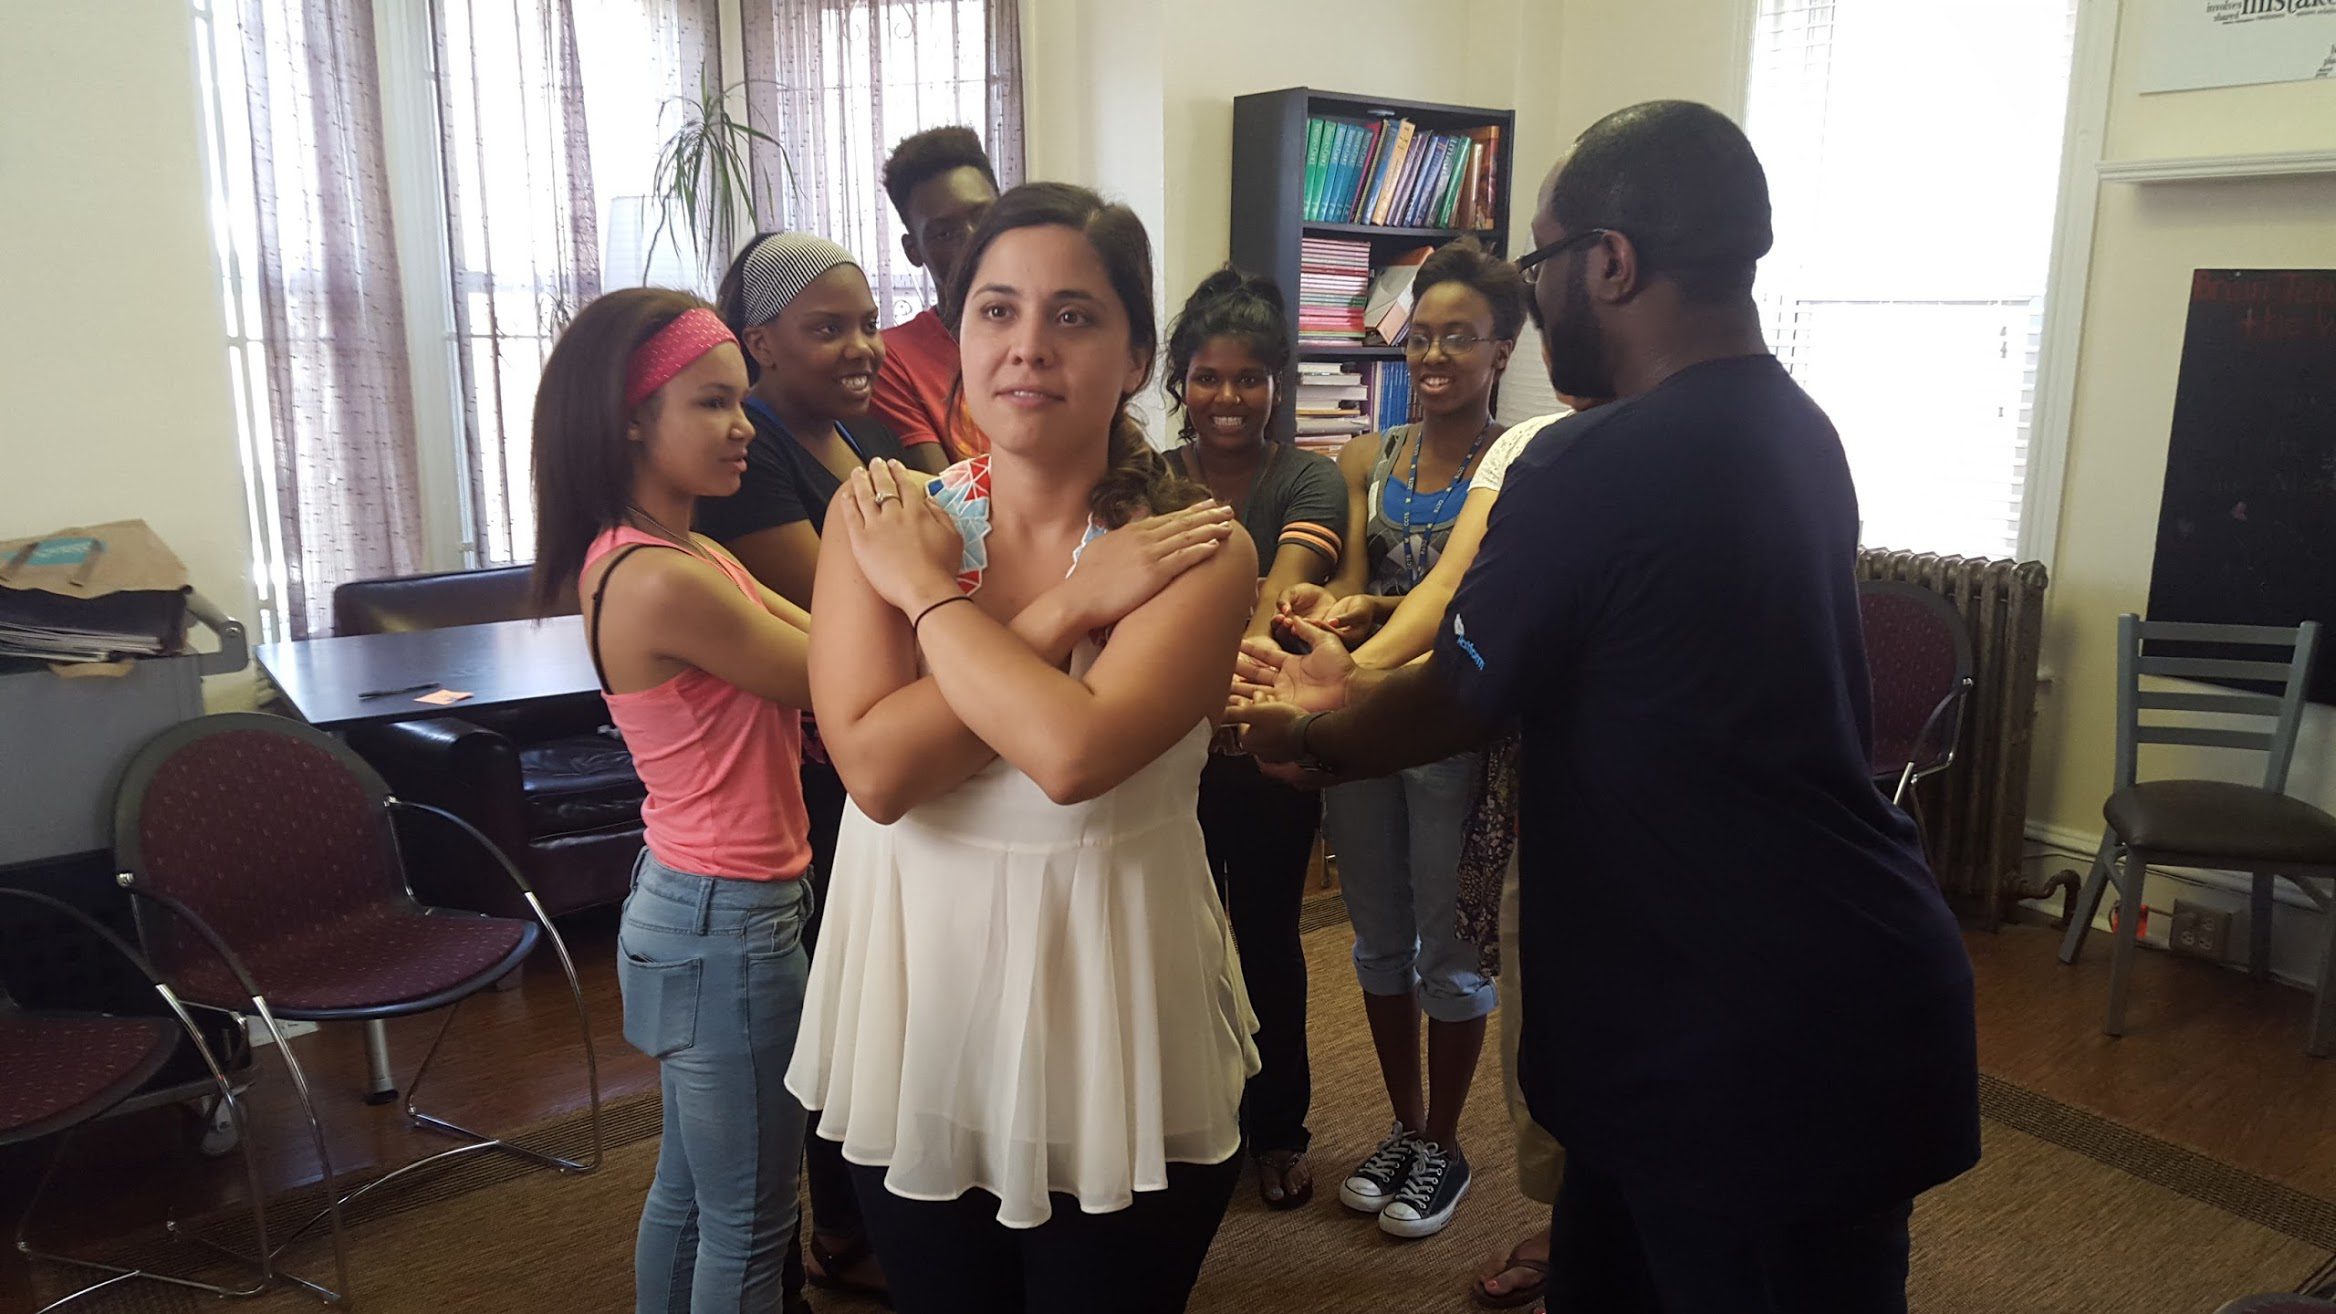 A member of a New Jersey based advocacy group crosses her hands over her chest and her fellow group members line up behind her with their arms extended. This is a trust fall.